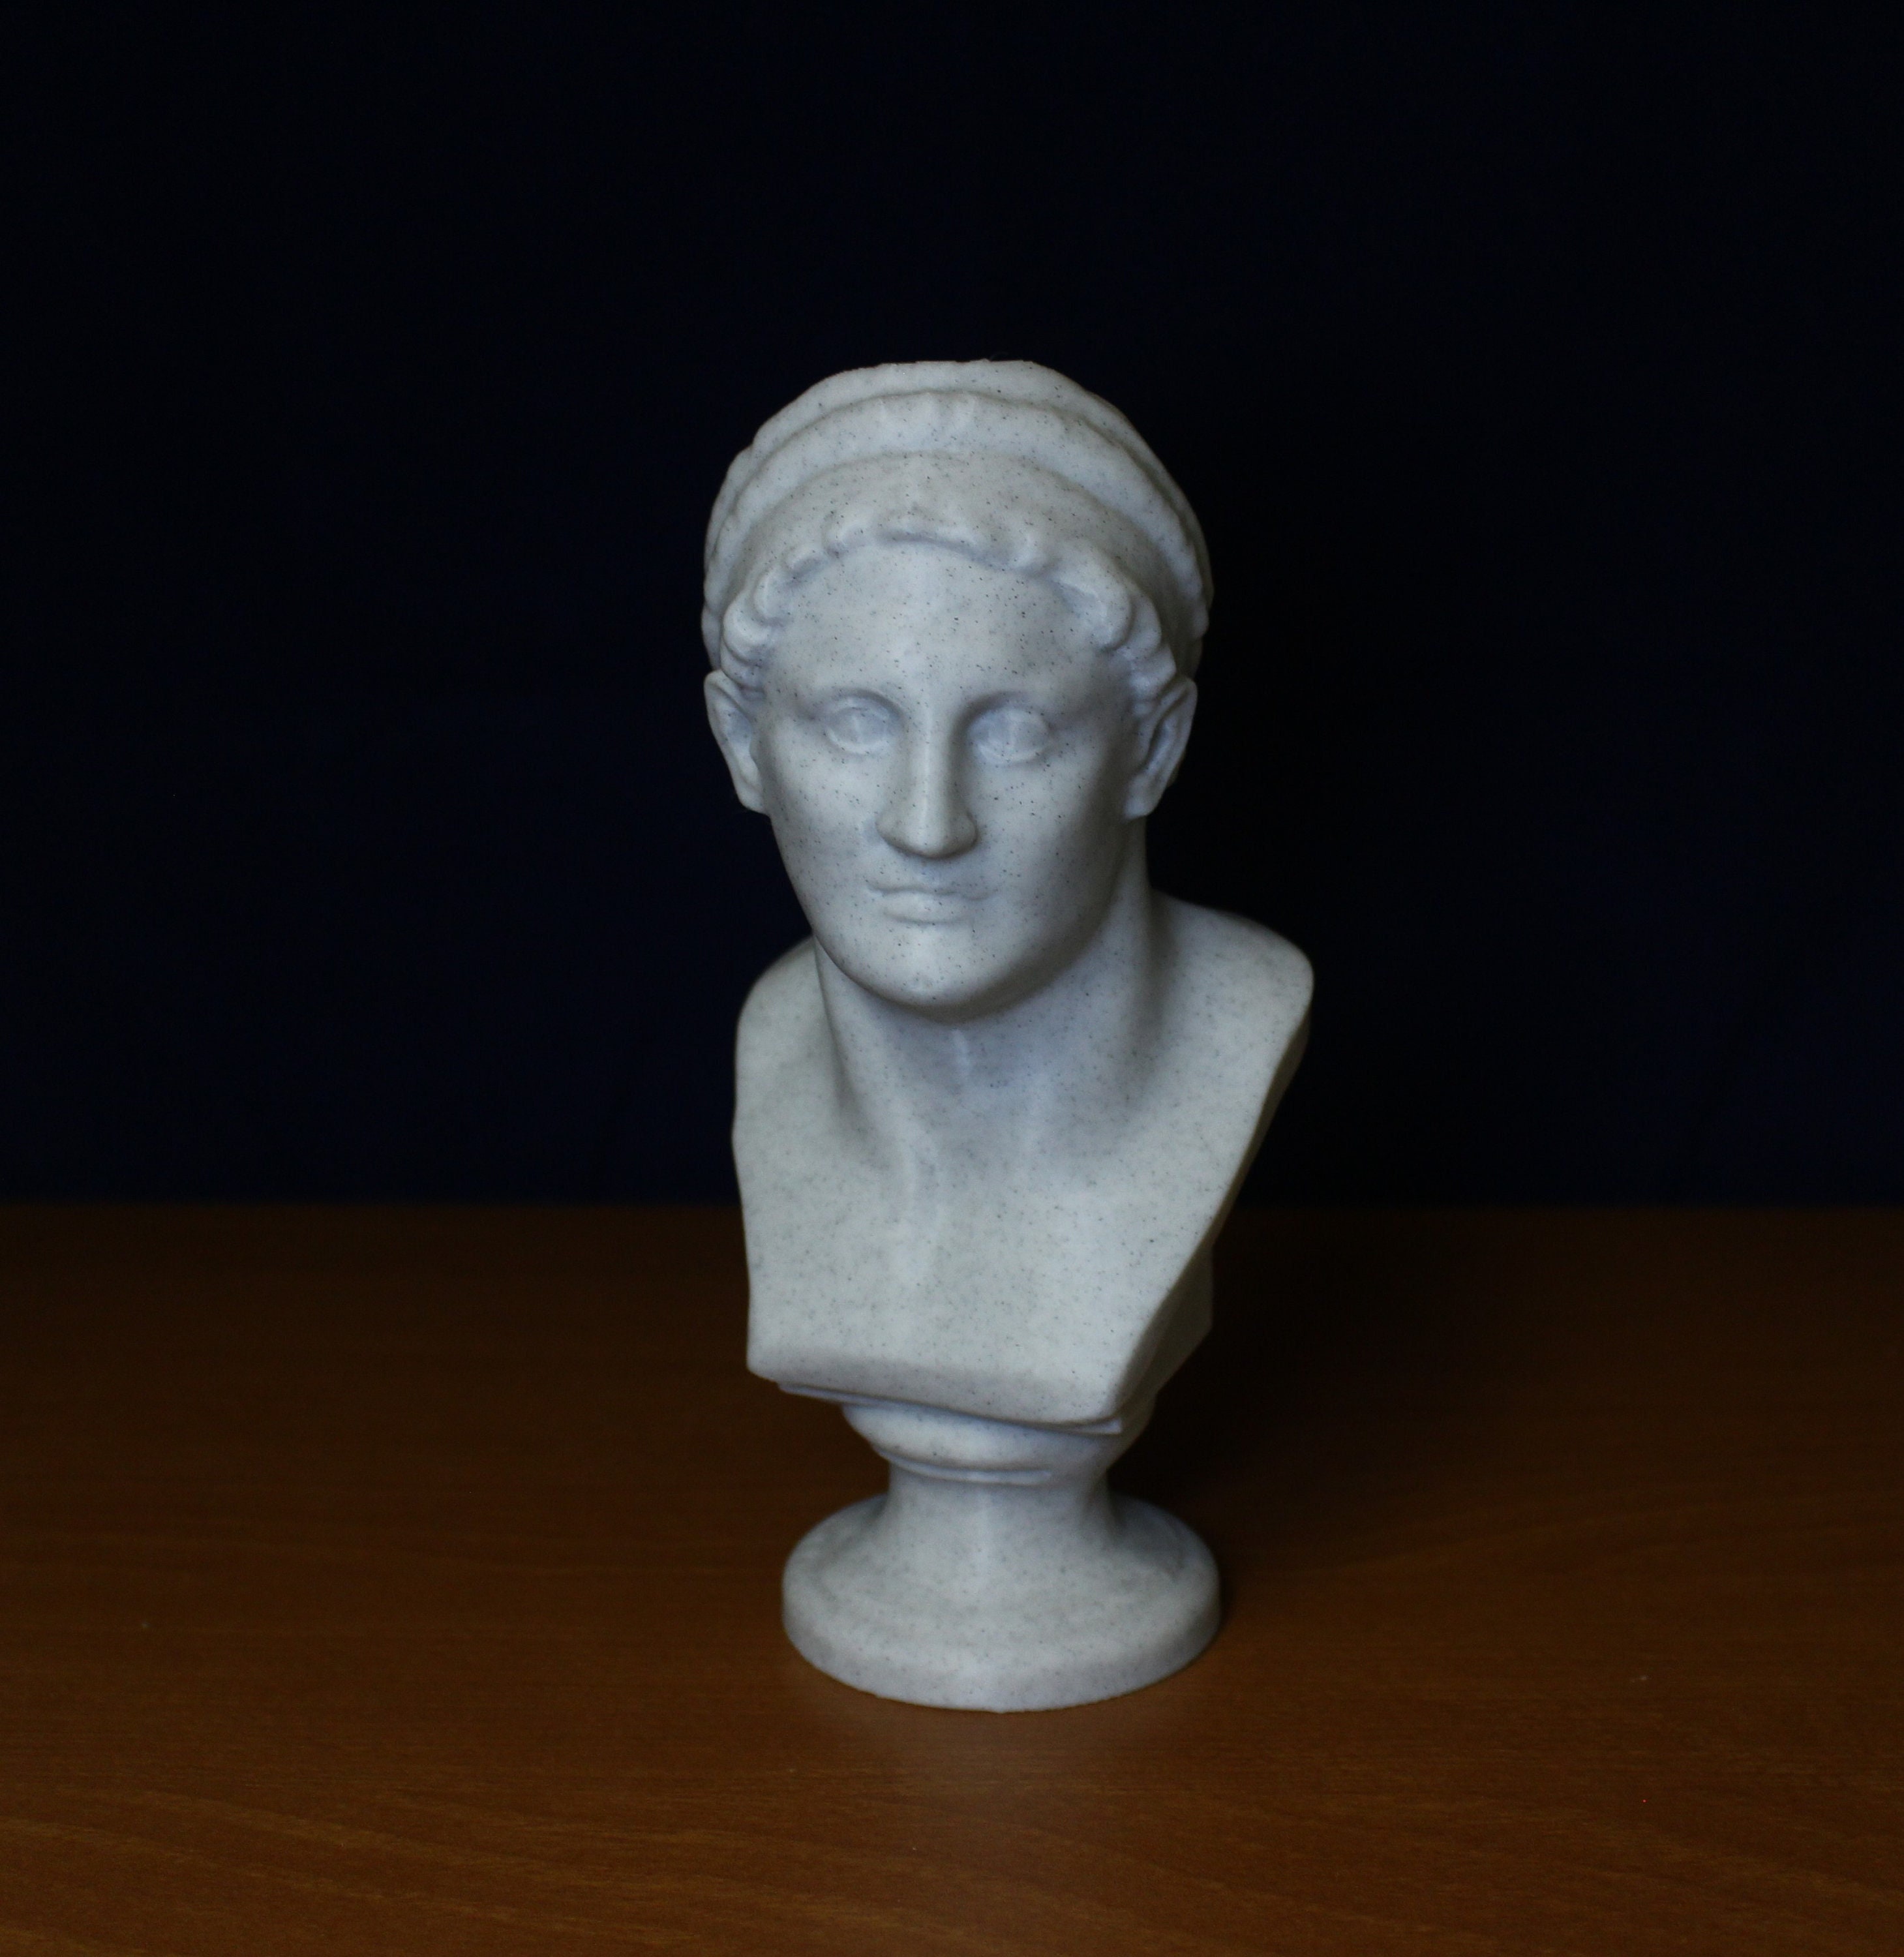 3D Printable Ptolemy 1st Soter, King of Egypt at The Louvre, Paris